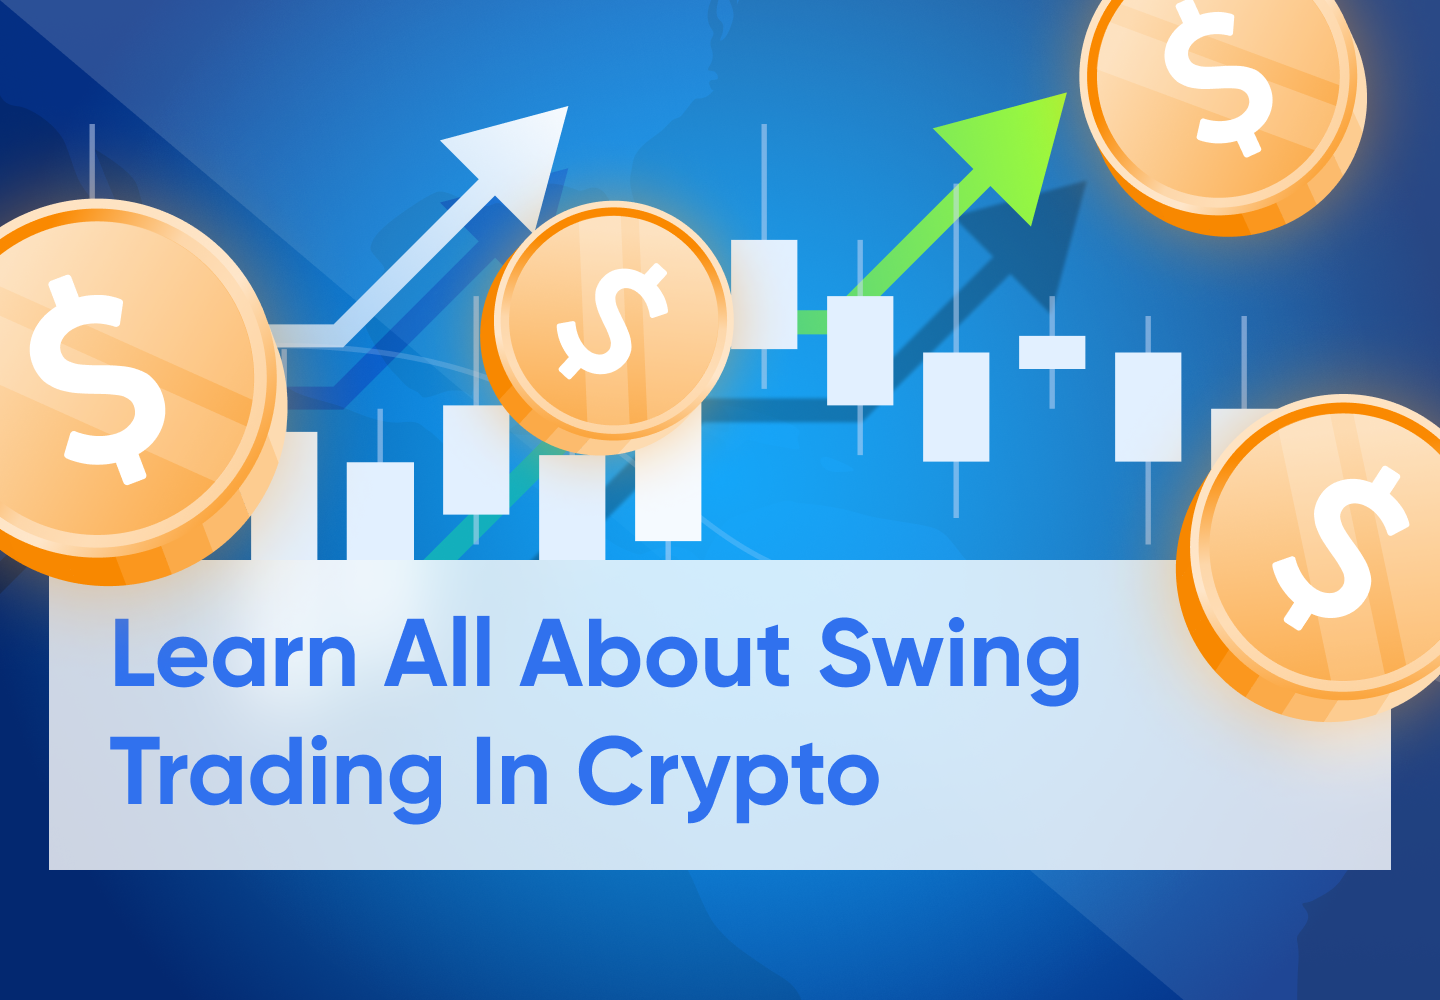 What Is Swing Trading?